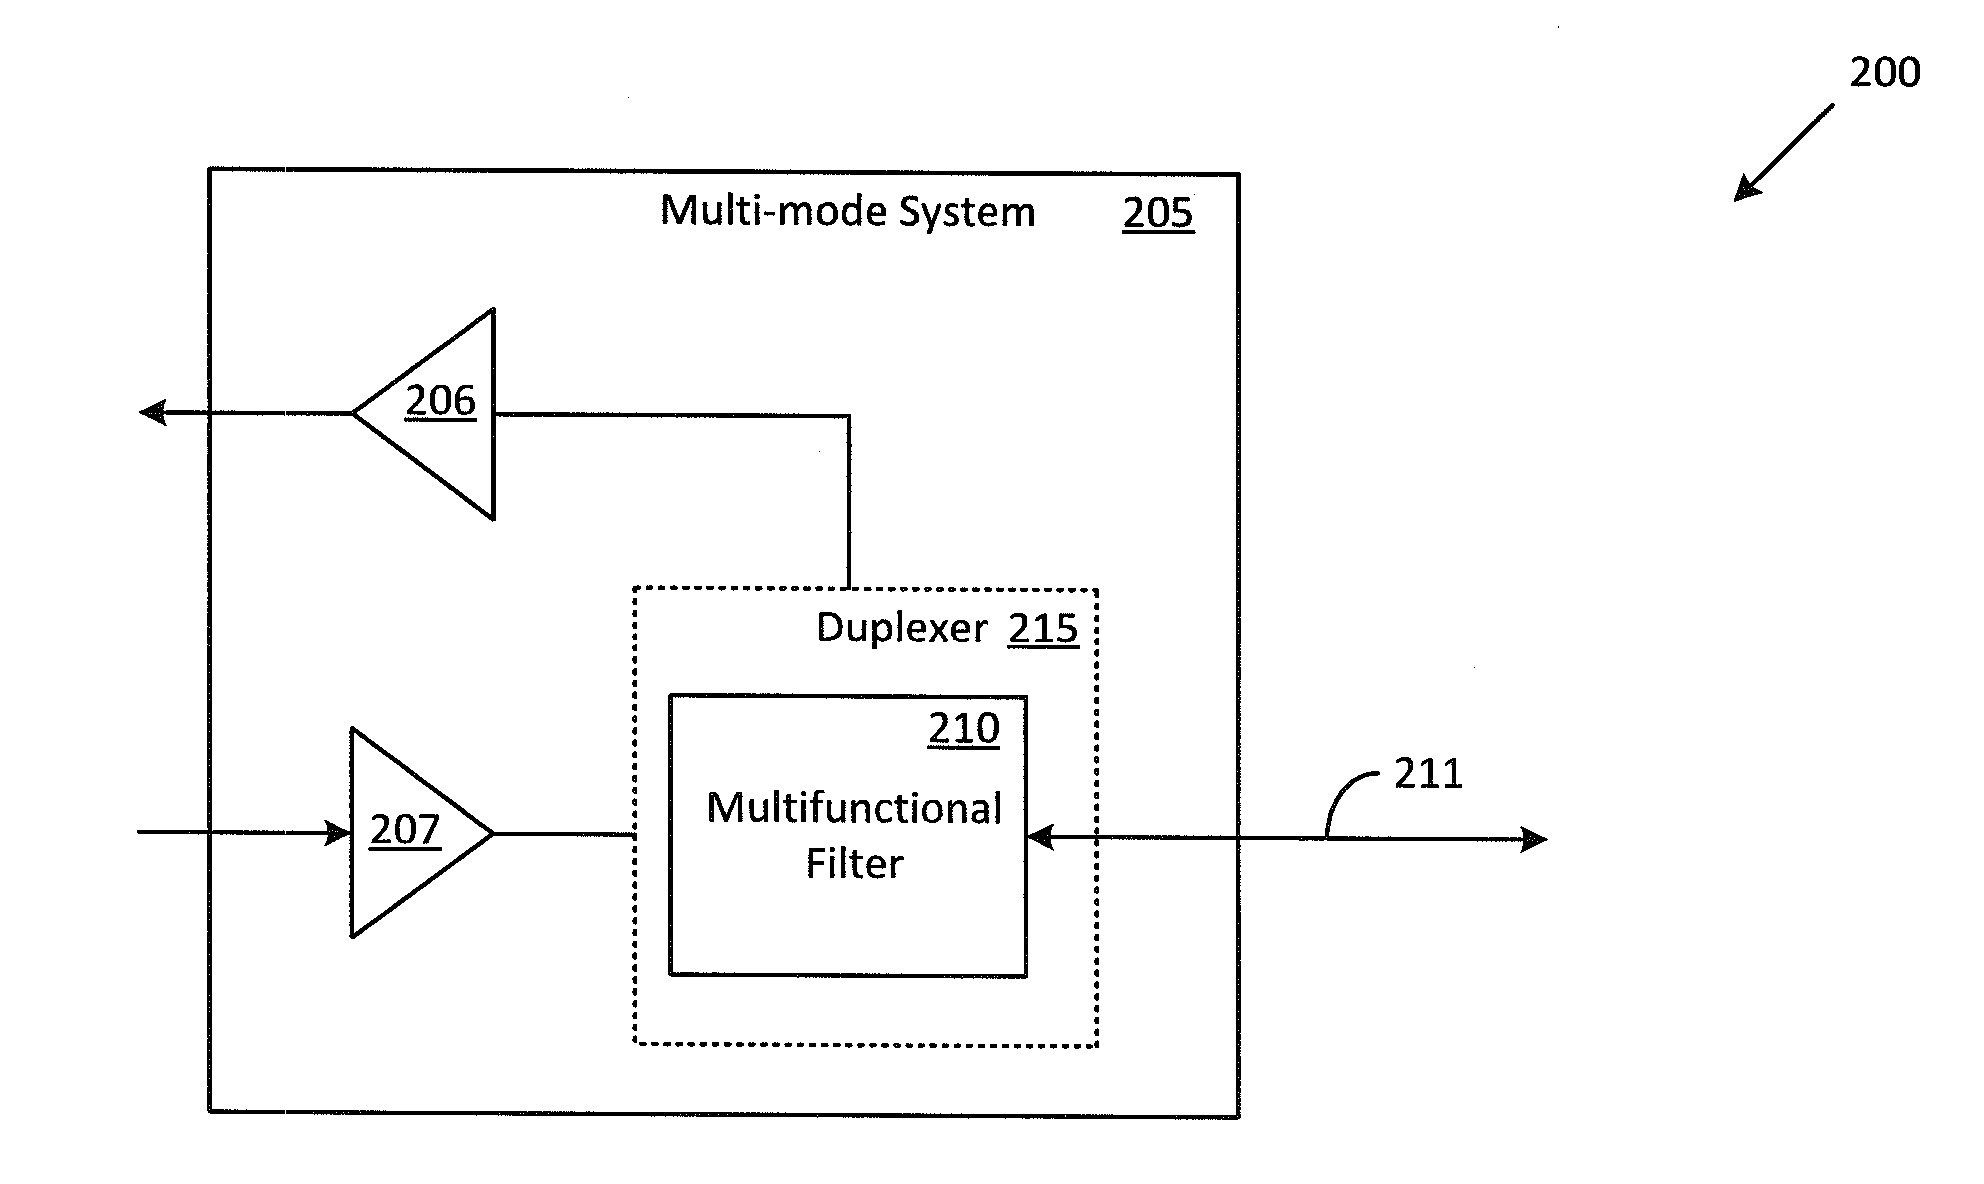 Systems and Methods for Minimizing Insertion Loss in a Multi-Mode Communications System